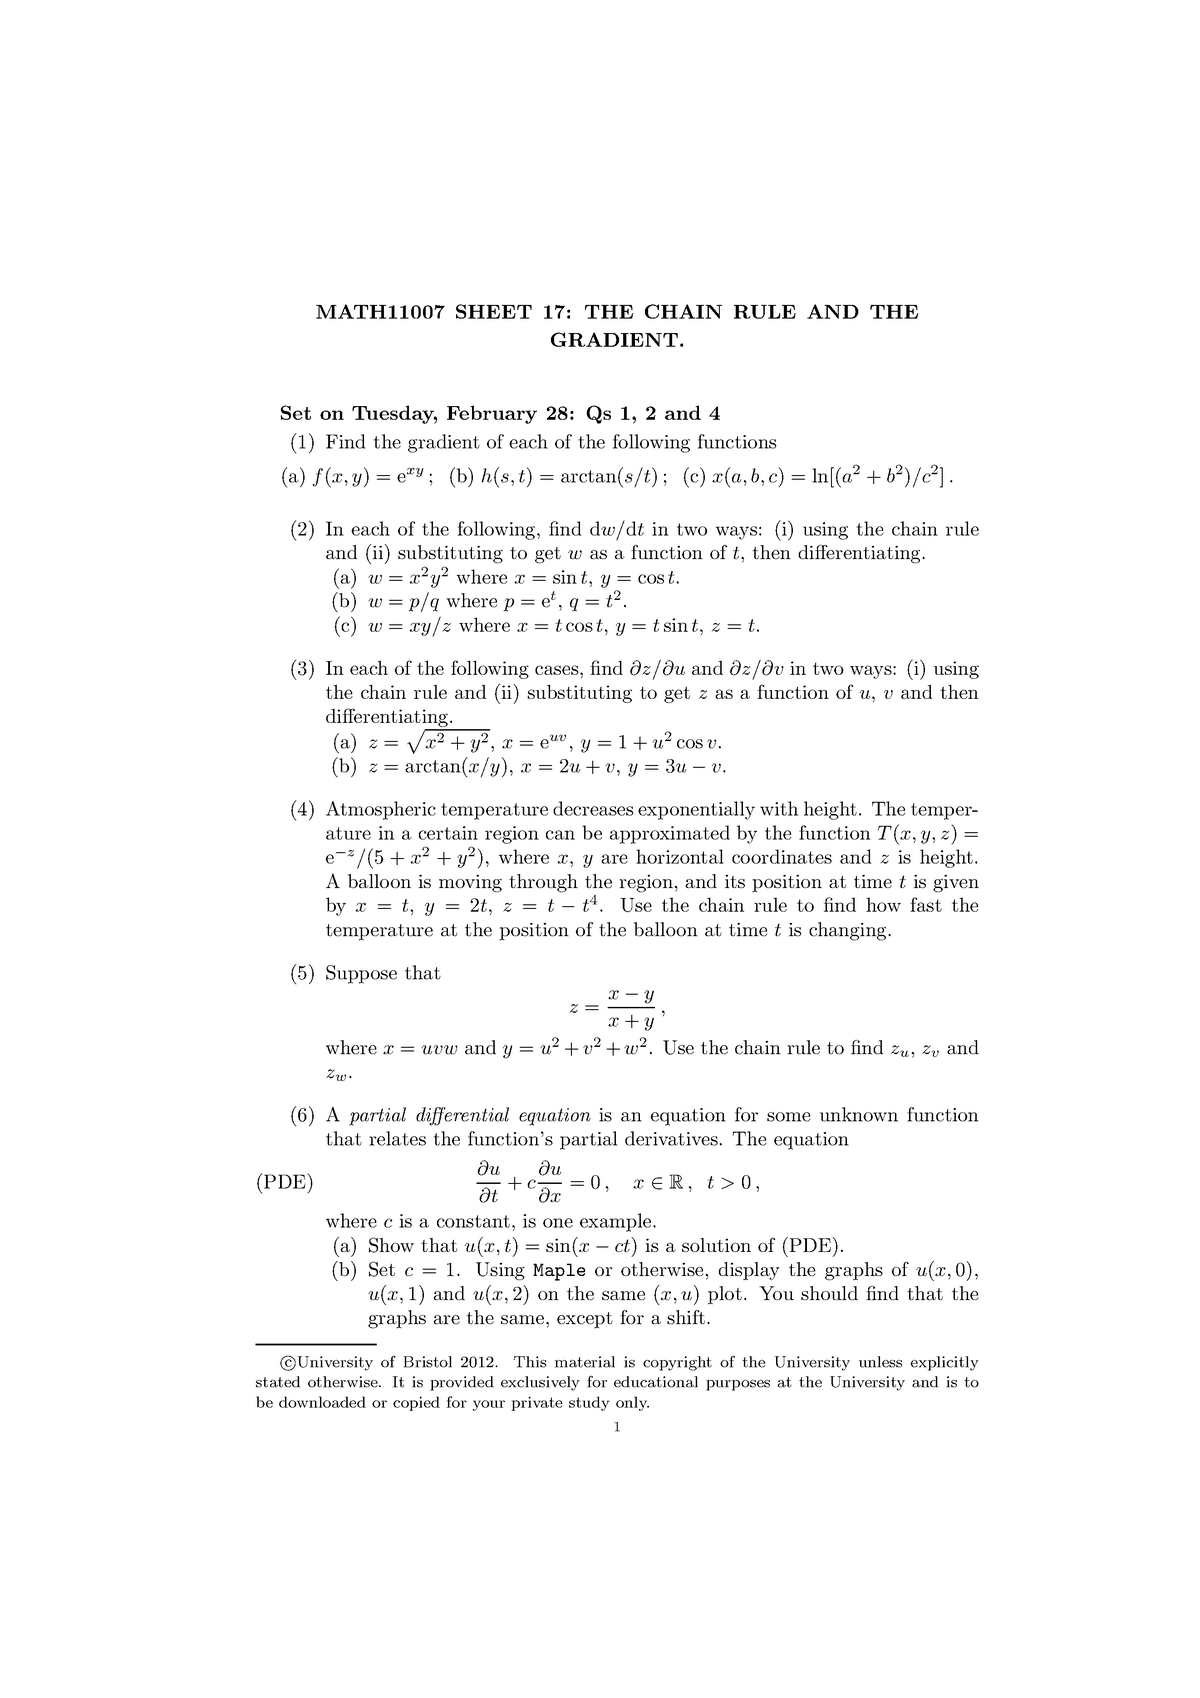 Math 12 13 Problem Sheet 17 The Chain Rule And The Gradient Math Sheet 17 The Chain Rule And The Gradient Set On Tuesday February 28 Qs And Find Studocu